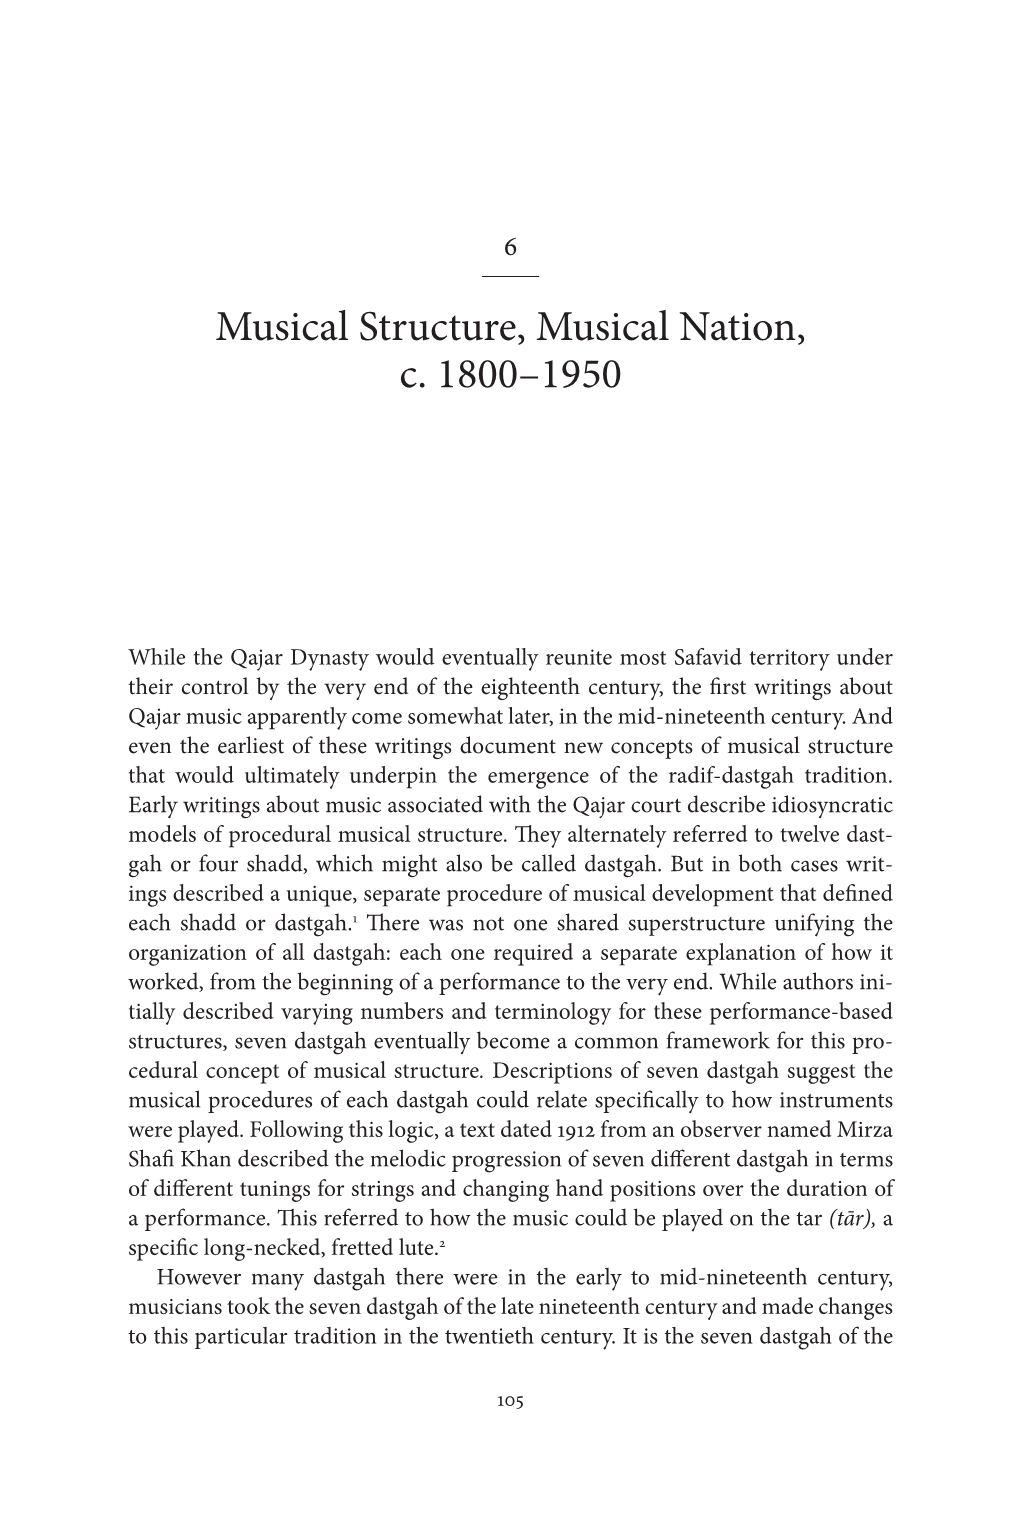 Musical Structure, Musical Nation, C. 1800–1950